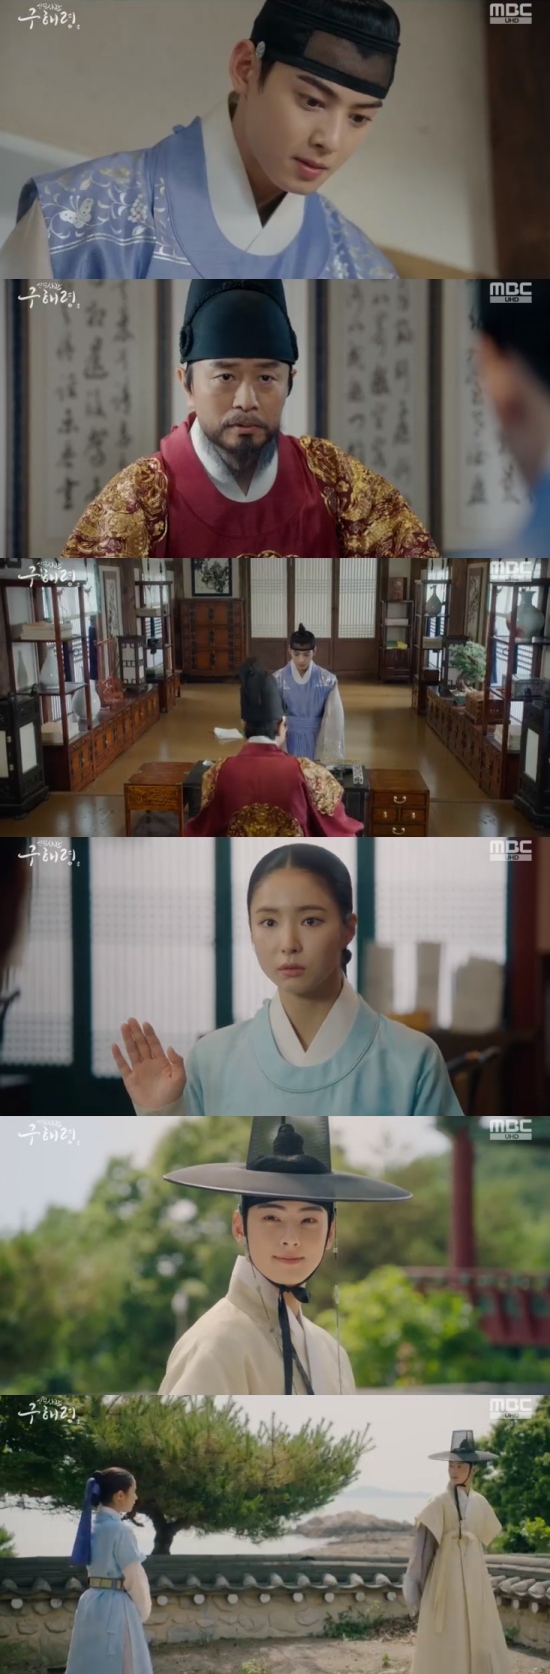 Na Hae-ryung, the new officer Jung Eun-woo began to express his mind toward Shin Se-kyung.In the 13th and 14th MBC drama Na Hae-ryung, which was broadcast on the 7th, Lee Rim (Jung Eun-woo) and Na Hae-ryung (Shin Se-kyung) were shown watching the sea.On this day, Lee Tae (Kim Min-sang) ordered Lee Lim to go to Pyongyang where the plague is circulating. Heo Sam-bo (Sung Ji-ru) said, Daewon Daegun Mama has never suffered from a flurry.I dare to intervene somewhere, and the spirit of the plague will be weak and will soon fade.I am sending you to soothe the public, so you can read the book and light your face here and there. But the officers avoided going to Pyongyang, and Koo Na Hae-ryung volunteered to go to Pyongyang, saying, I have been in a double-headed state.Later, Irim and Na Hae-ryung arrived at Haeju, when Irim was told by Hesambo (Seongjiru) that there was a beach.Irim took the old Hae-ryung off the sea to go to the sea and dragged him to the beach.Na Hae-ryung said, Youre going to go out of there. Youre going to go out in nowhere. Why did you bring her out?While Mama is riding comfortably, I am very tired of walking from Hanyang for two nights and three days. Do your leisurely undercover alone. In the end, Irim said, Actually, I have never been to the beach.I wanted to see the sea for a long time, but I wanted someone to be around at this good moment. Na Hae-ryung took off his shoes as if he knew.Na Hae-ryung said, Take it off, you said it was your first time.I do not want to look at it with my eyes, but I should remember it with my fingertips. I also took off my shoes along Na Hae-ryung.Gu Na Hae-ryung walked down the sand and suggested, This is how you feel about stepping on the sand, try walking. Irim said, Its weird.It is very strange, he said, and Ilmi dipped his feet in the sea with Na Hae-ryung.In particular, Na Hae-ryung accidentally encountered Seung-Hoon Lee, who accused Lee of the evil of the officials.Seung-Hoon Lee said, Please save the people. The people who died in Hwanghae Island are over five hundred and the number of Pyeongan Island is too many.Even those who are not sick are trapped in the village and starving to death, he said. Lee said, I sent medicines in coordination. The officials are trying to avoid responsibility and the people are tied up, so I can not ask for help anywhere, said Seung-Hoon Lee.Irim also wondered what kind of relationship Seung-Hoon Lee and Na Hae-ryung were, and Na Hae-ryung said, Its a jiabi.Irim said, Jiavy. You were married. Tell me more. When and where you met. He must have hung on to you.I am so interested in me, said Na Hae-ryung, who said, I am so sorry that I am so flawed.So stop questioning me now, he said.Irim said, Dismissal? What are you, Na Hae-ryung? You never liked him anyway?This is a part of the fact that Lee Rim likes Na Hae-ryung.I wondered if Irim and Na Hae-ryung could develop into a love line in the future.Photo = MBC Broadcasting Screen